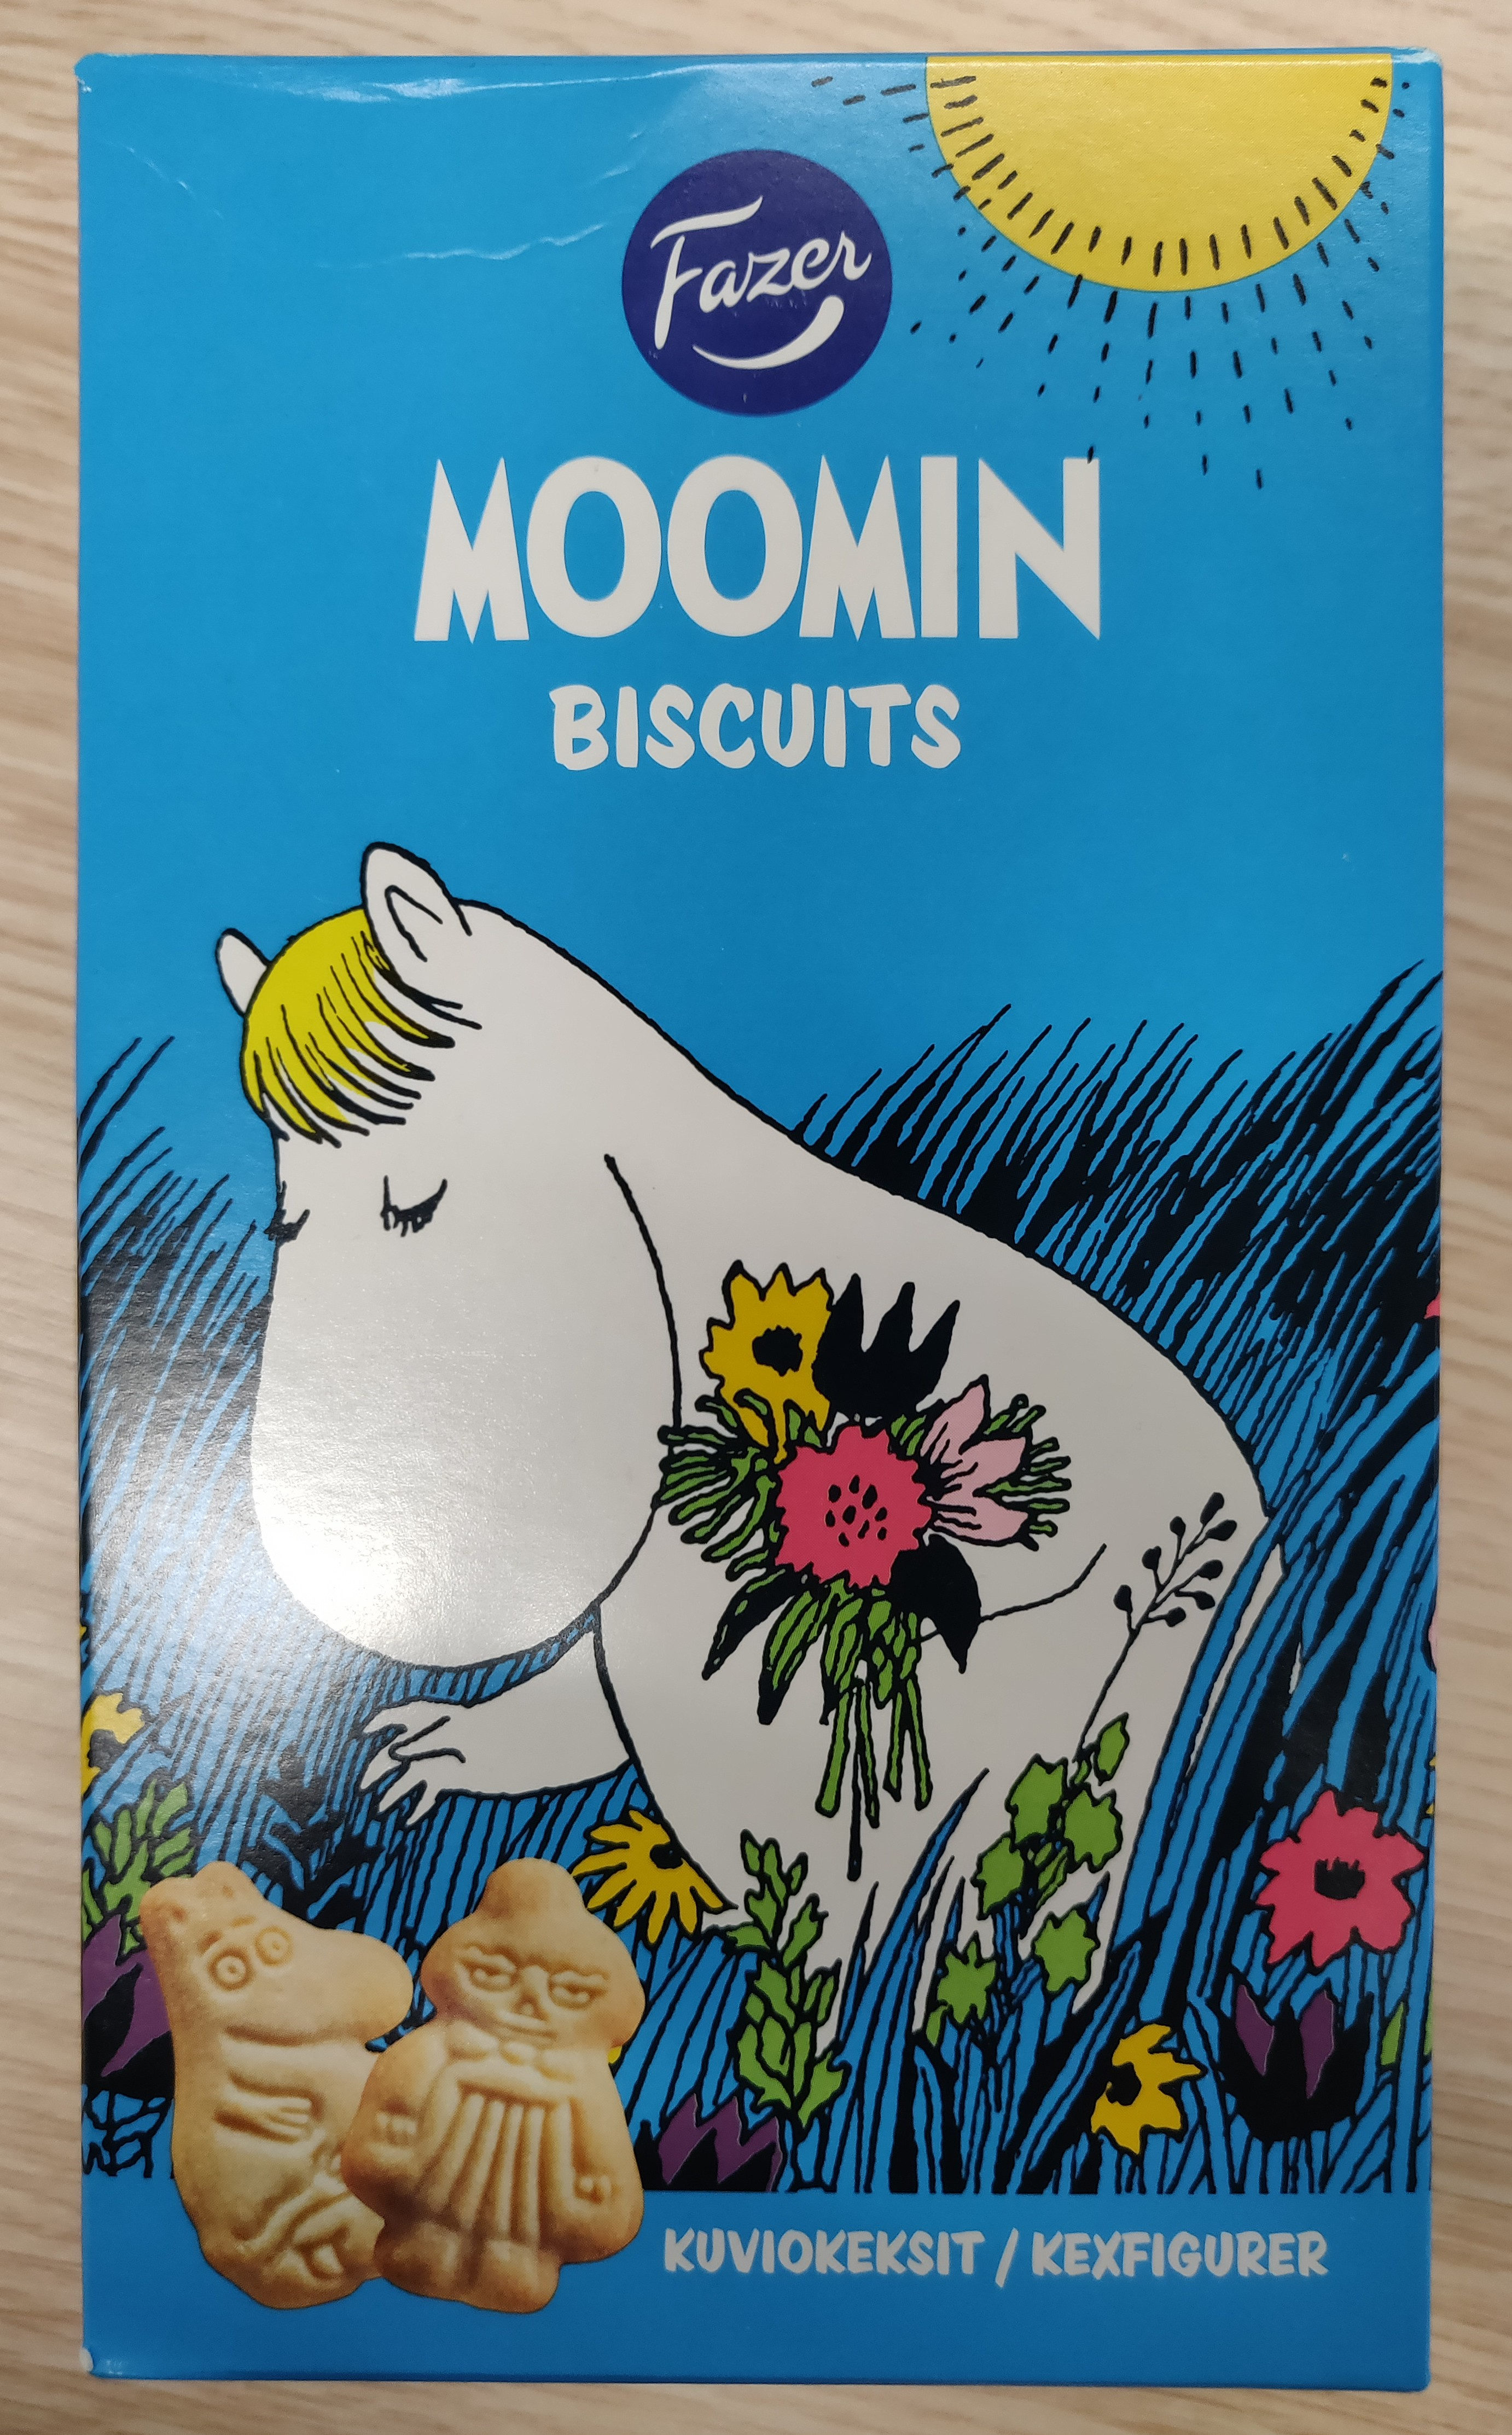 Moomin biscuits - Tuote - fi